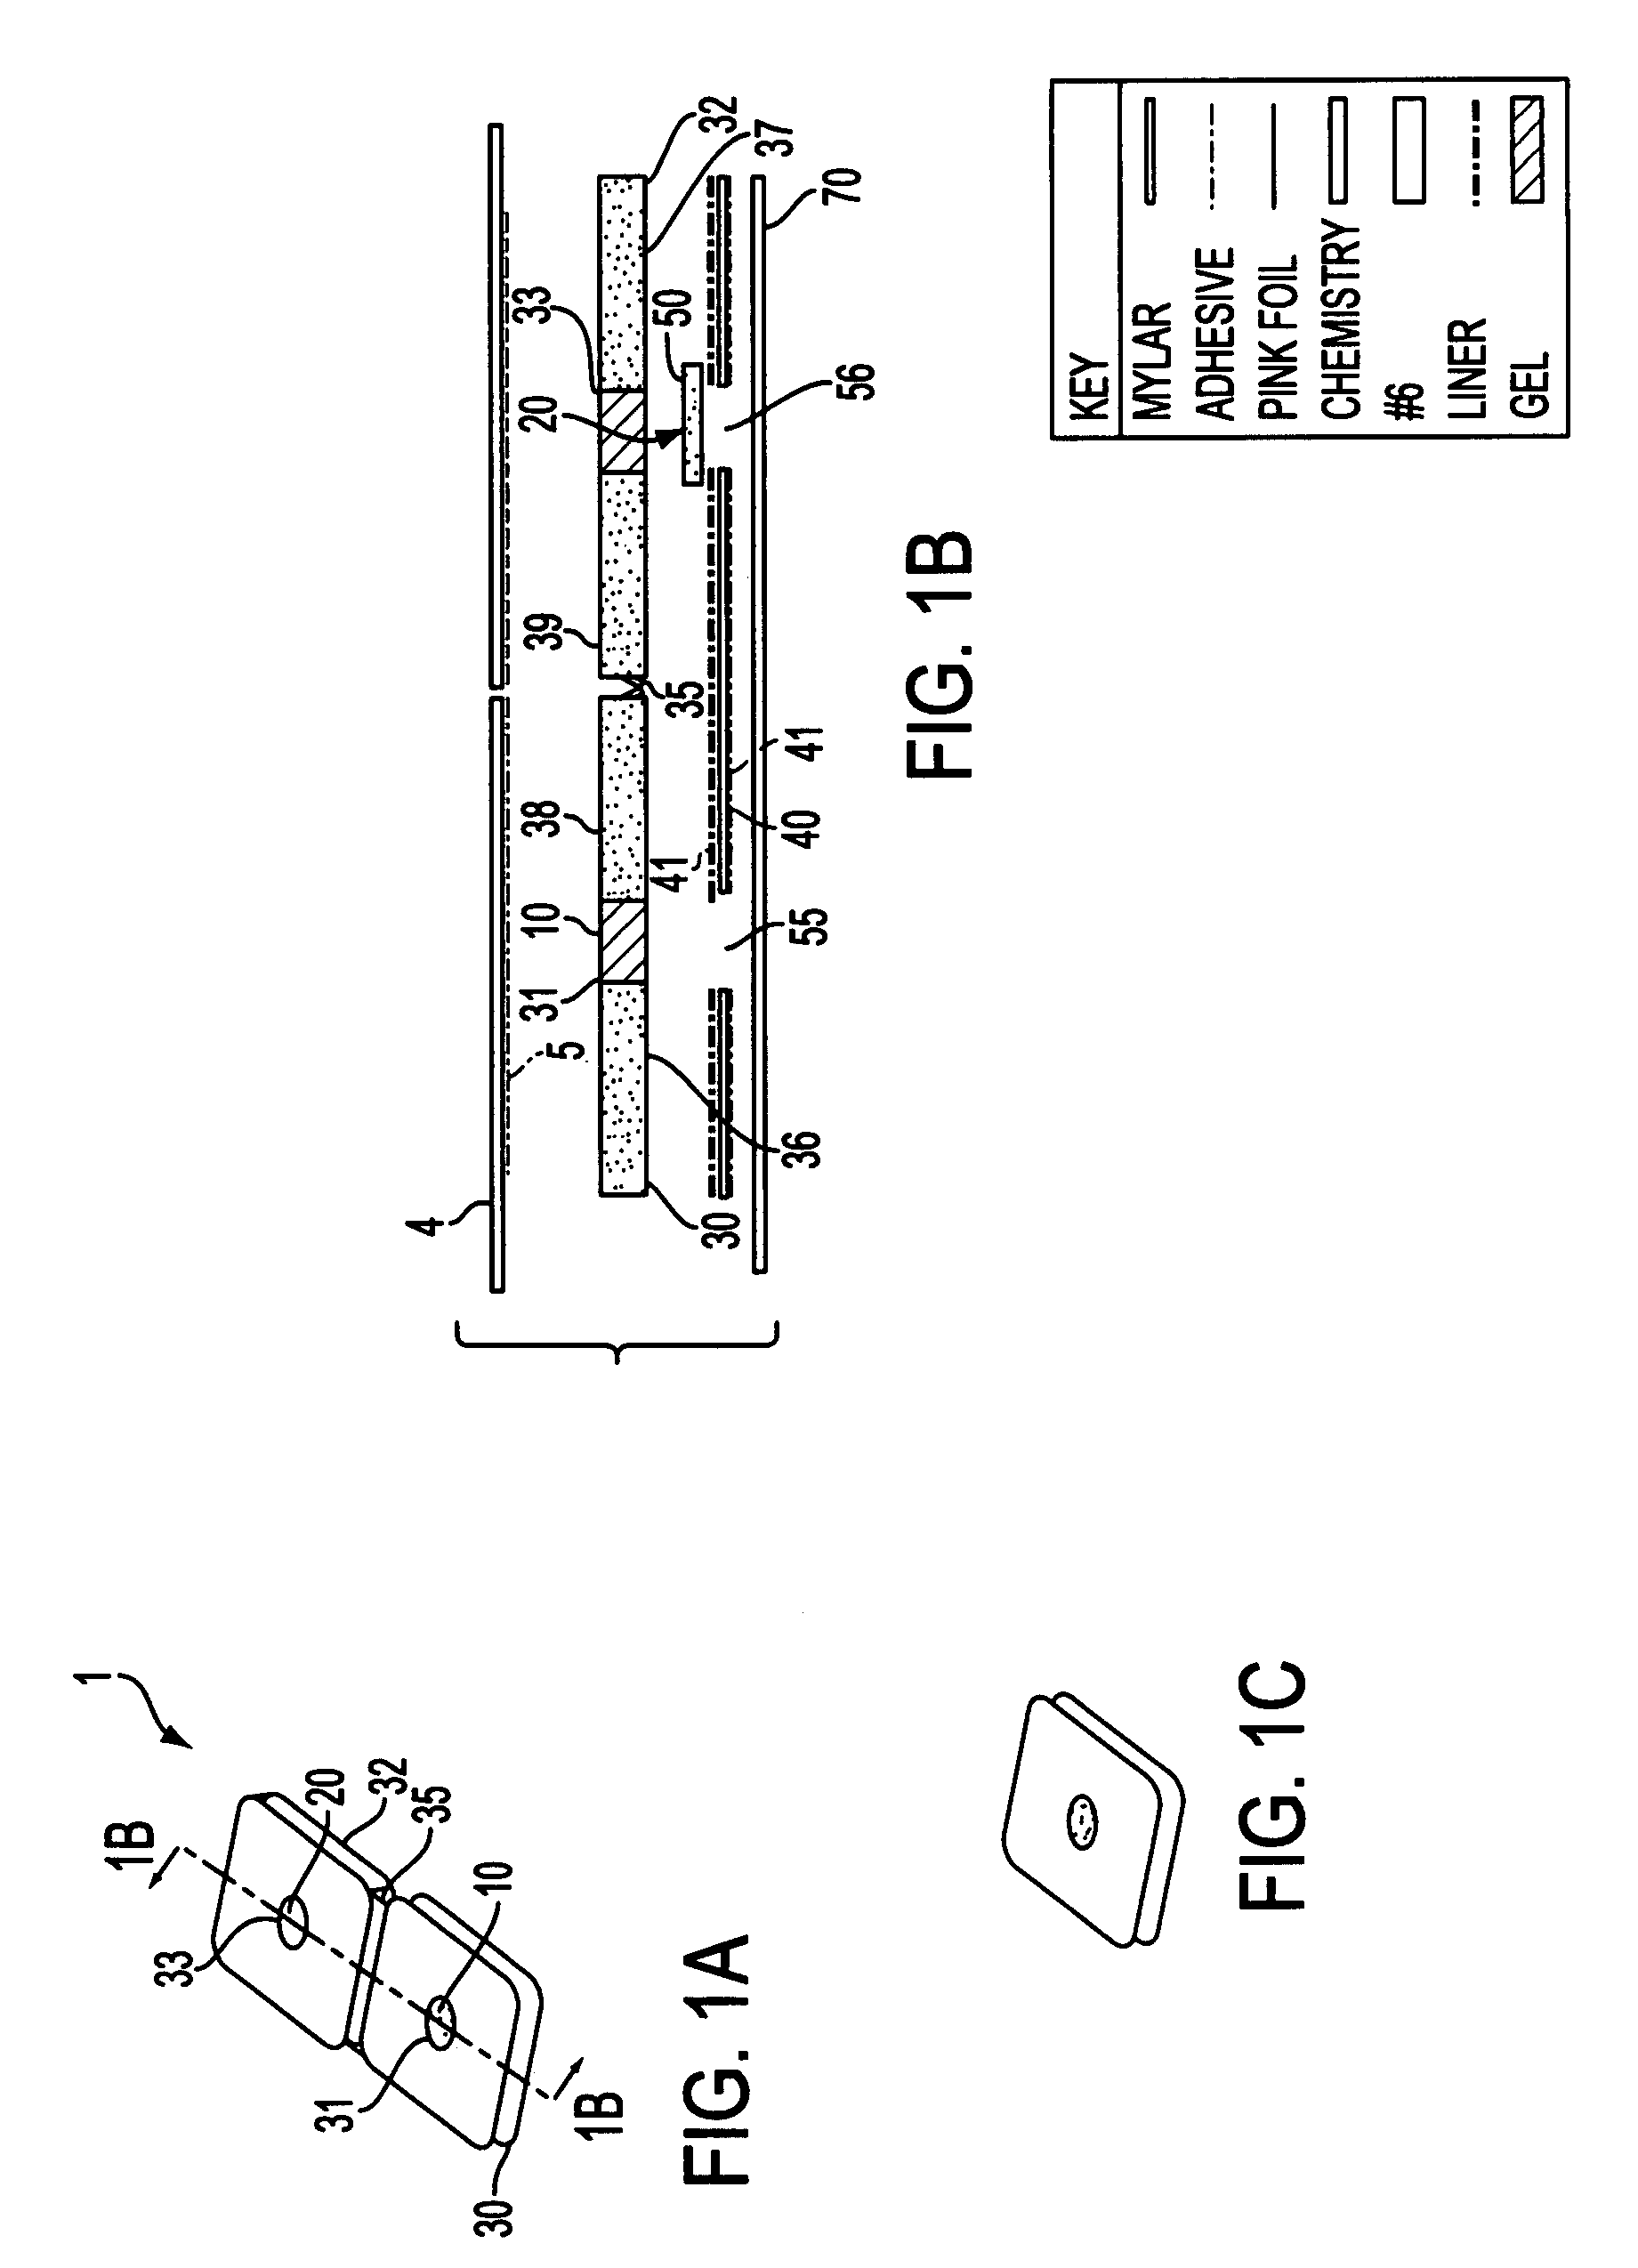 Noninvasive transdermal systems for detecting an analyte in a biological fluid and methods